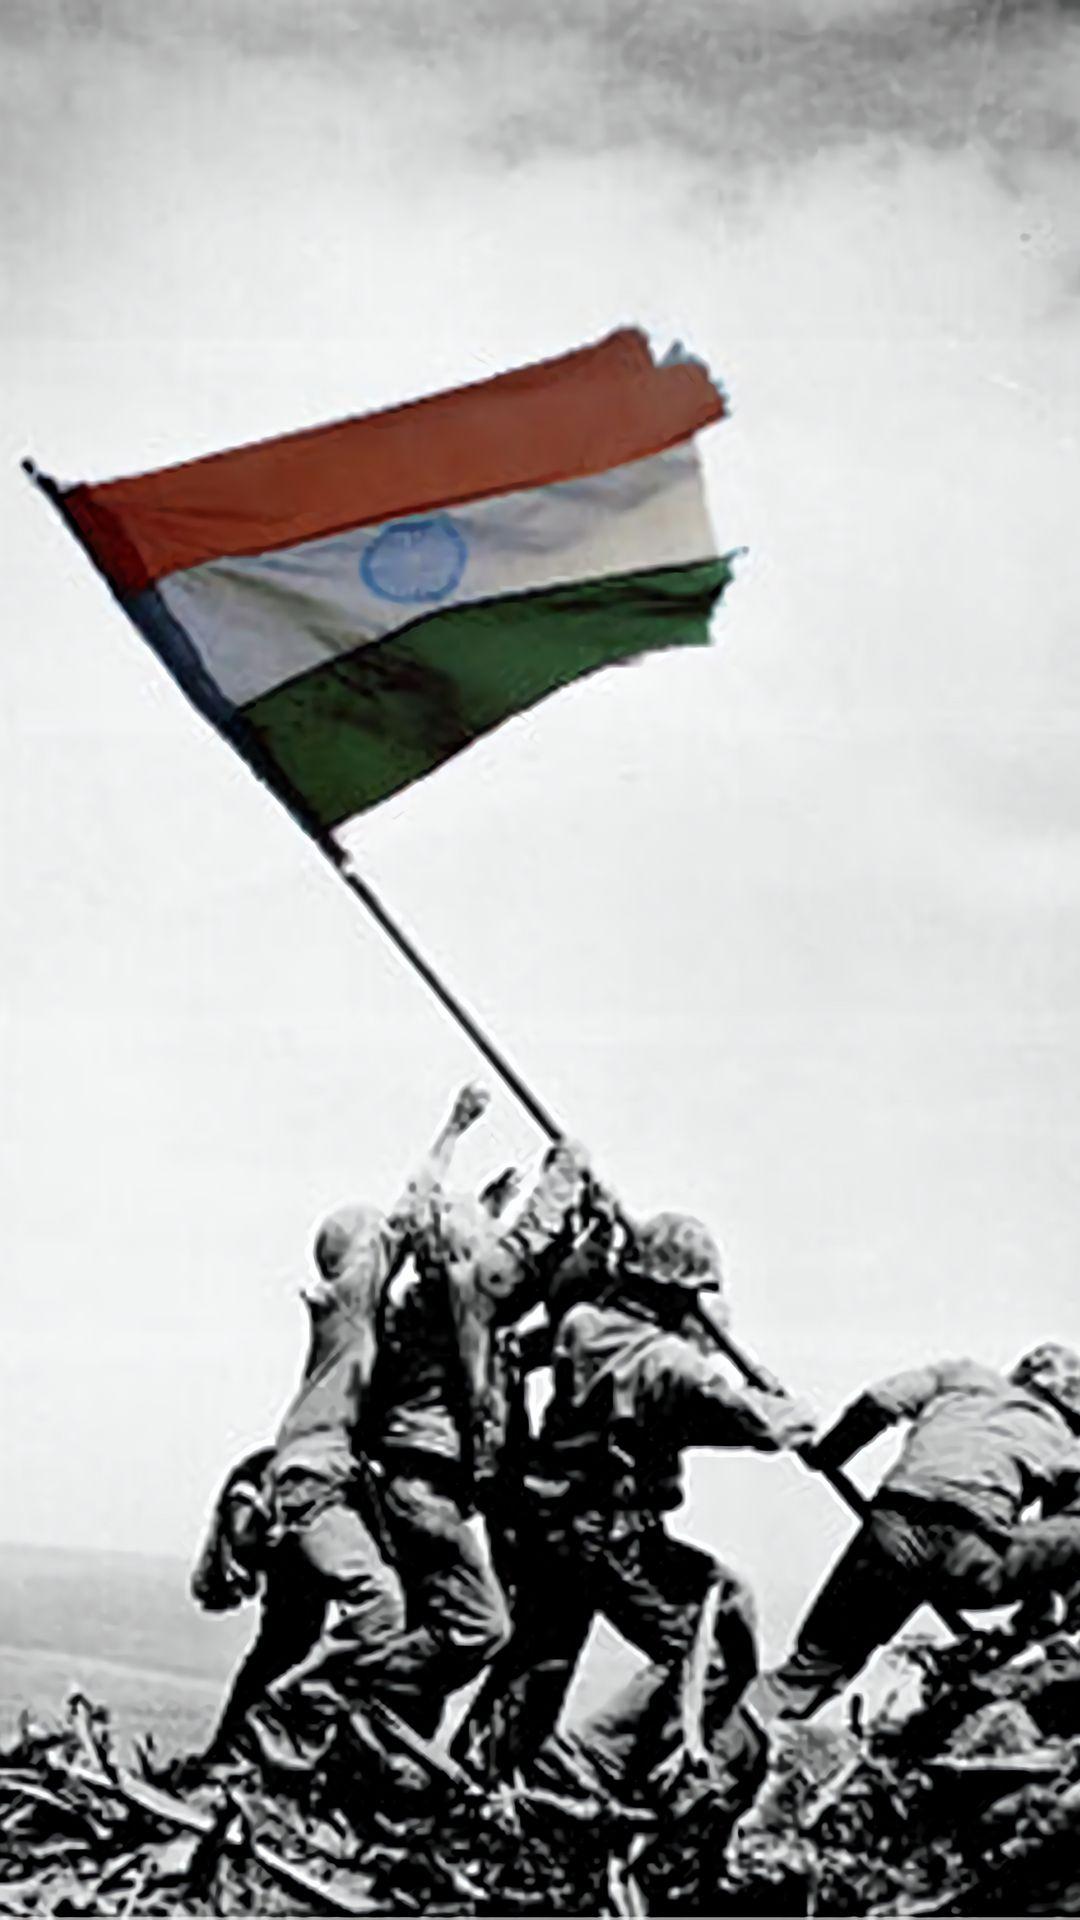 description. Indian army wallpaper, India independence, Indian army